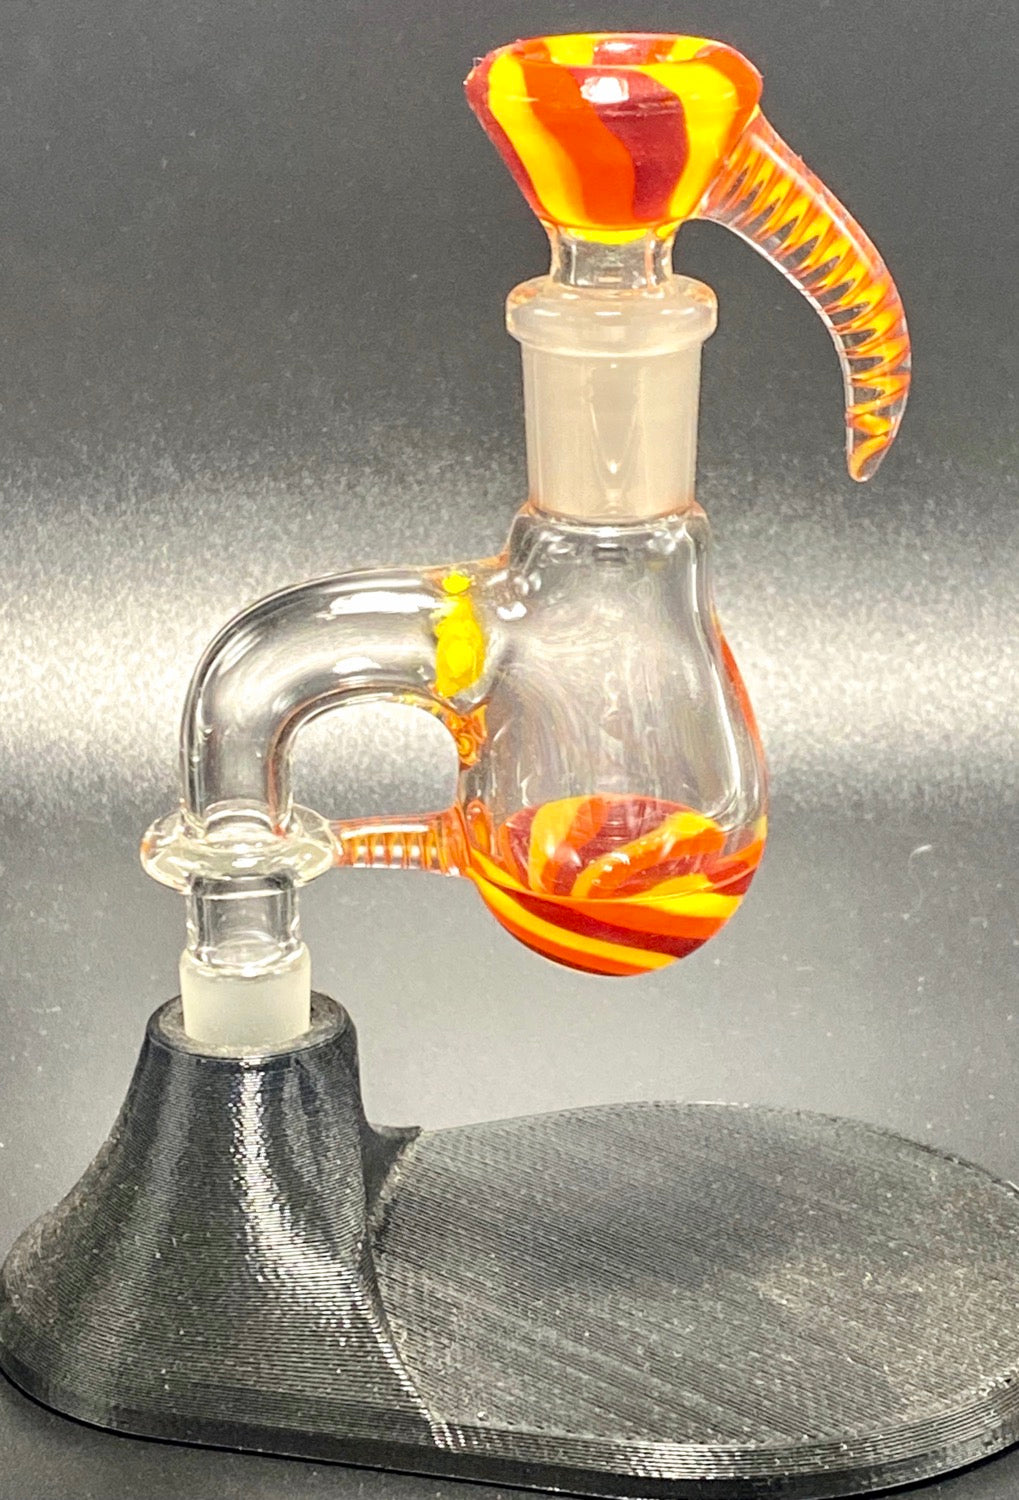 14mm MATCHING DRY ASH CATCH & 14mm 3 Hole SLIDE BY JULIO GLASS - TheSmokeyMcPotz Collection 